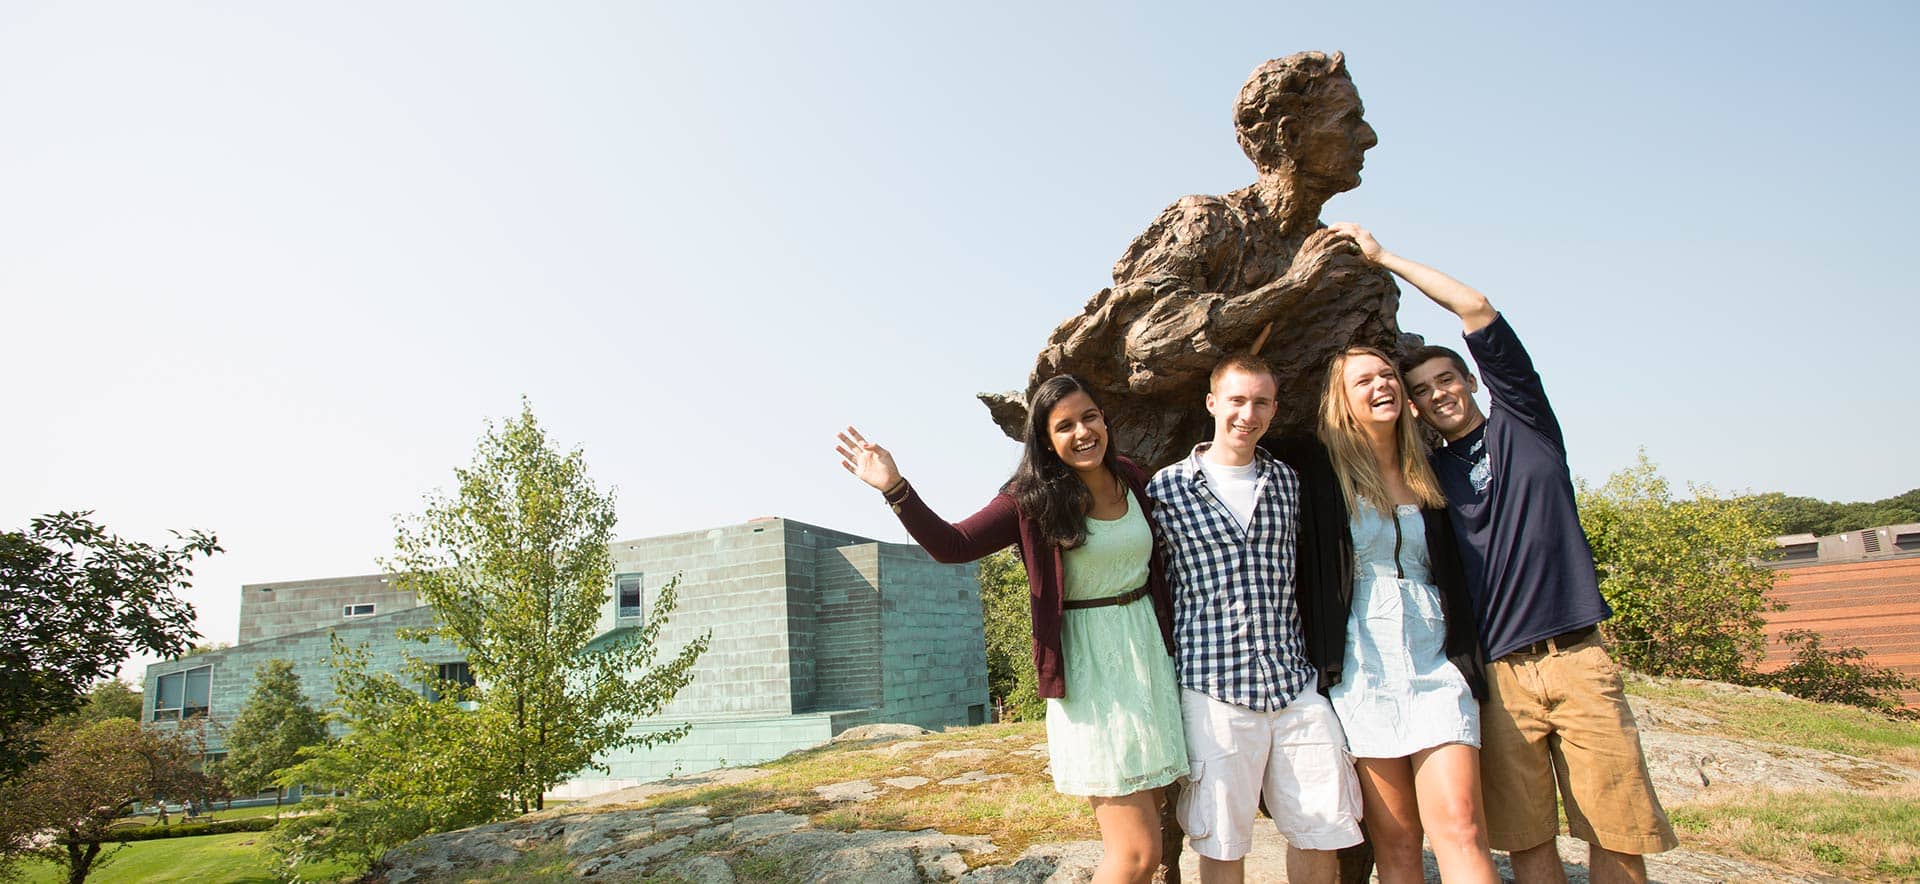 Students posing with the Statue of Justice Louis D. Brandeis on campus